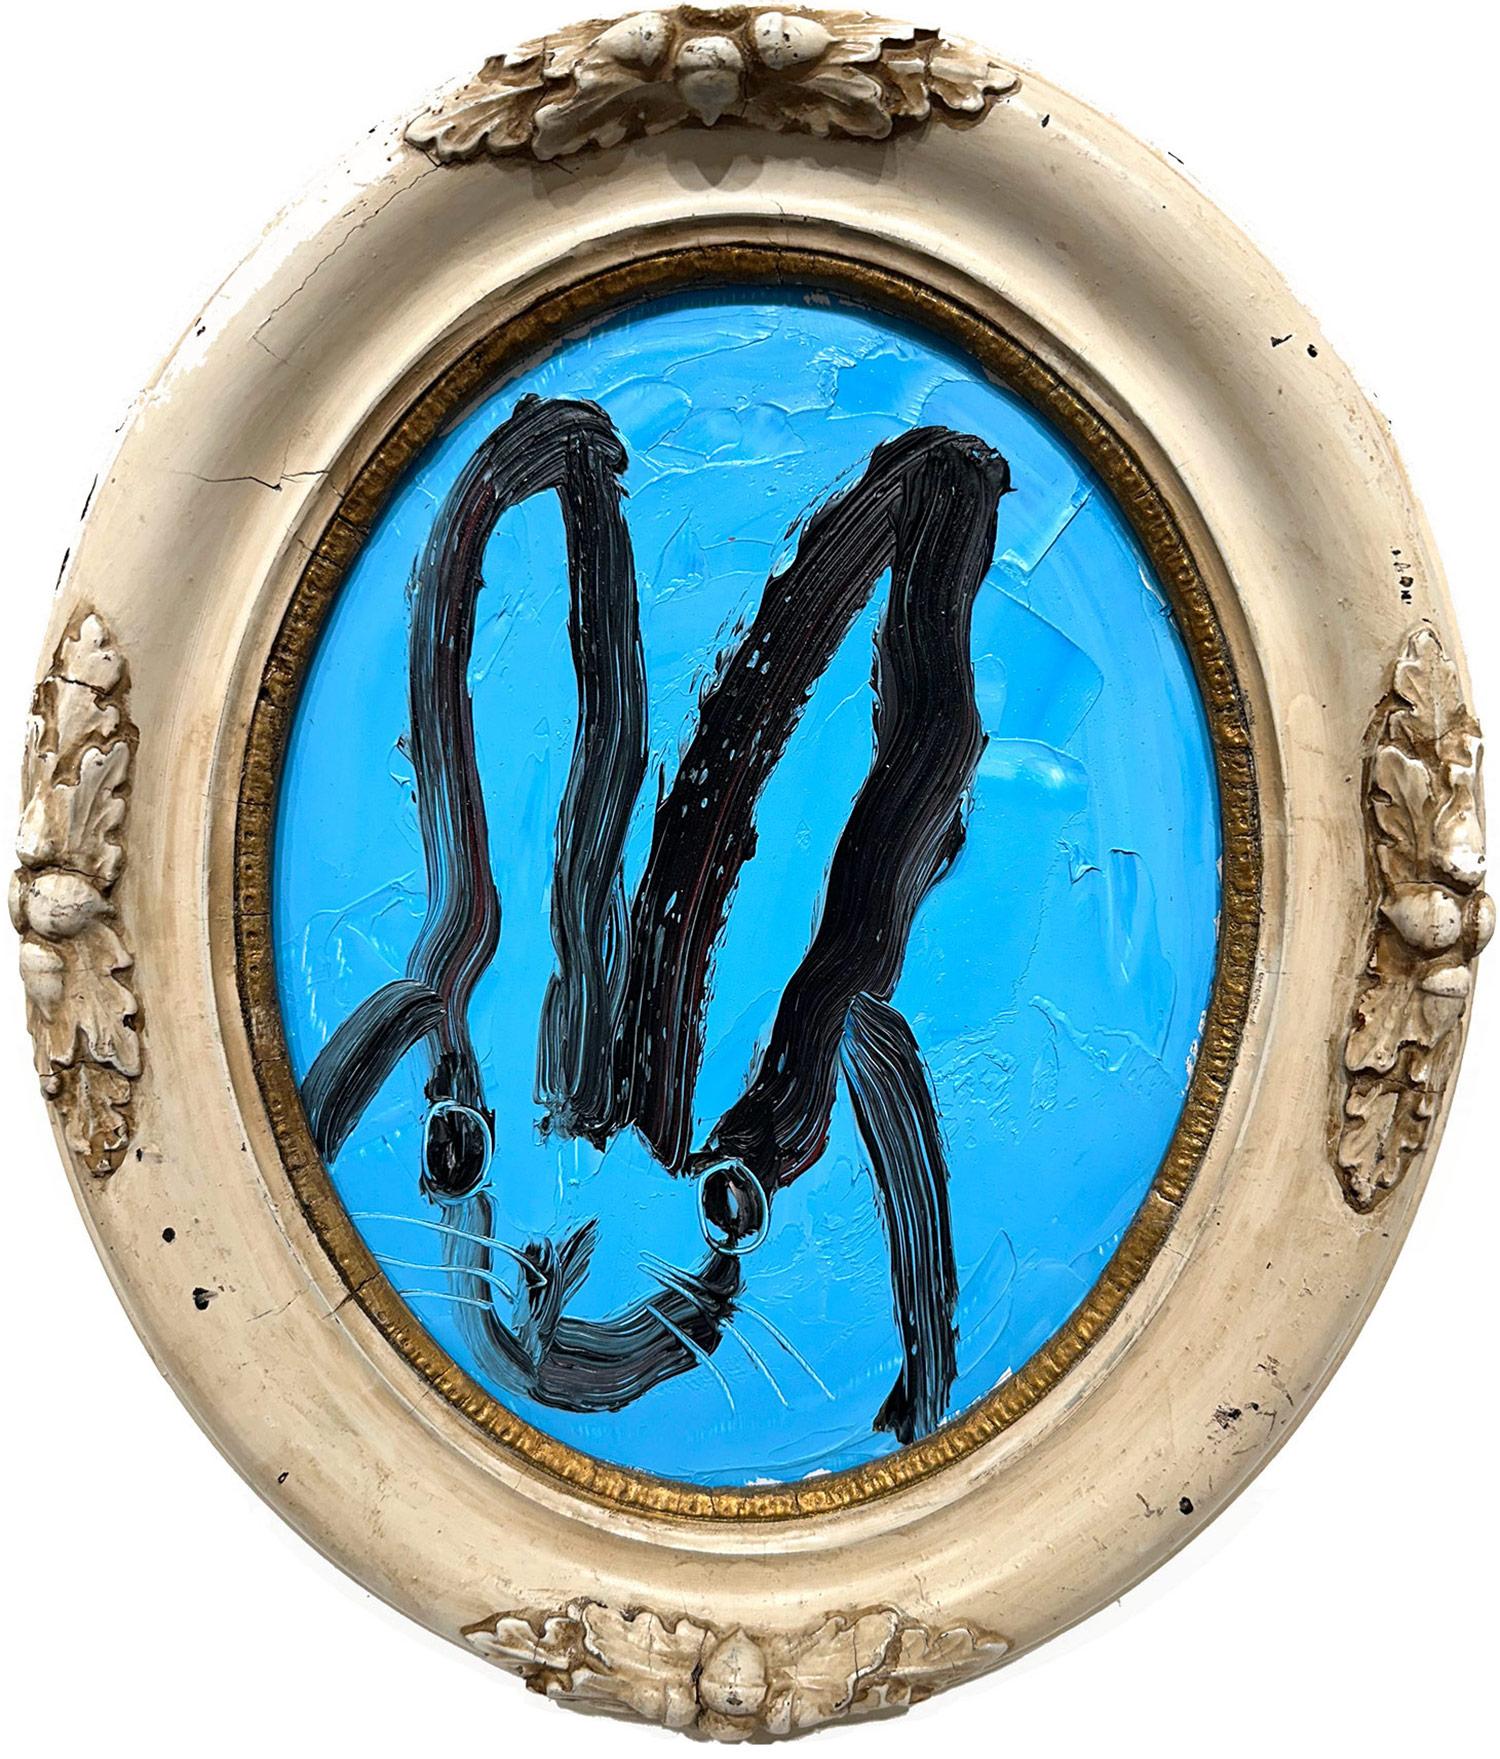 "Margo" Black Outlined Bunny on French Blue Background Oil Painting - Oval Frame